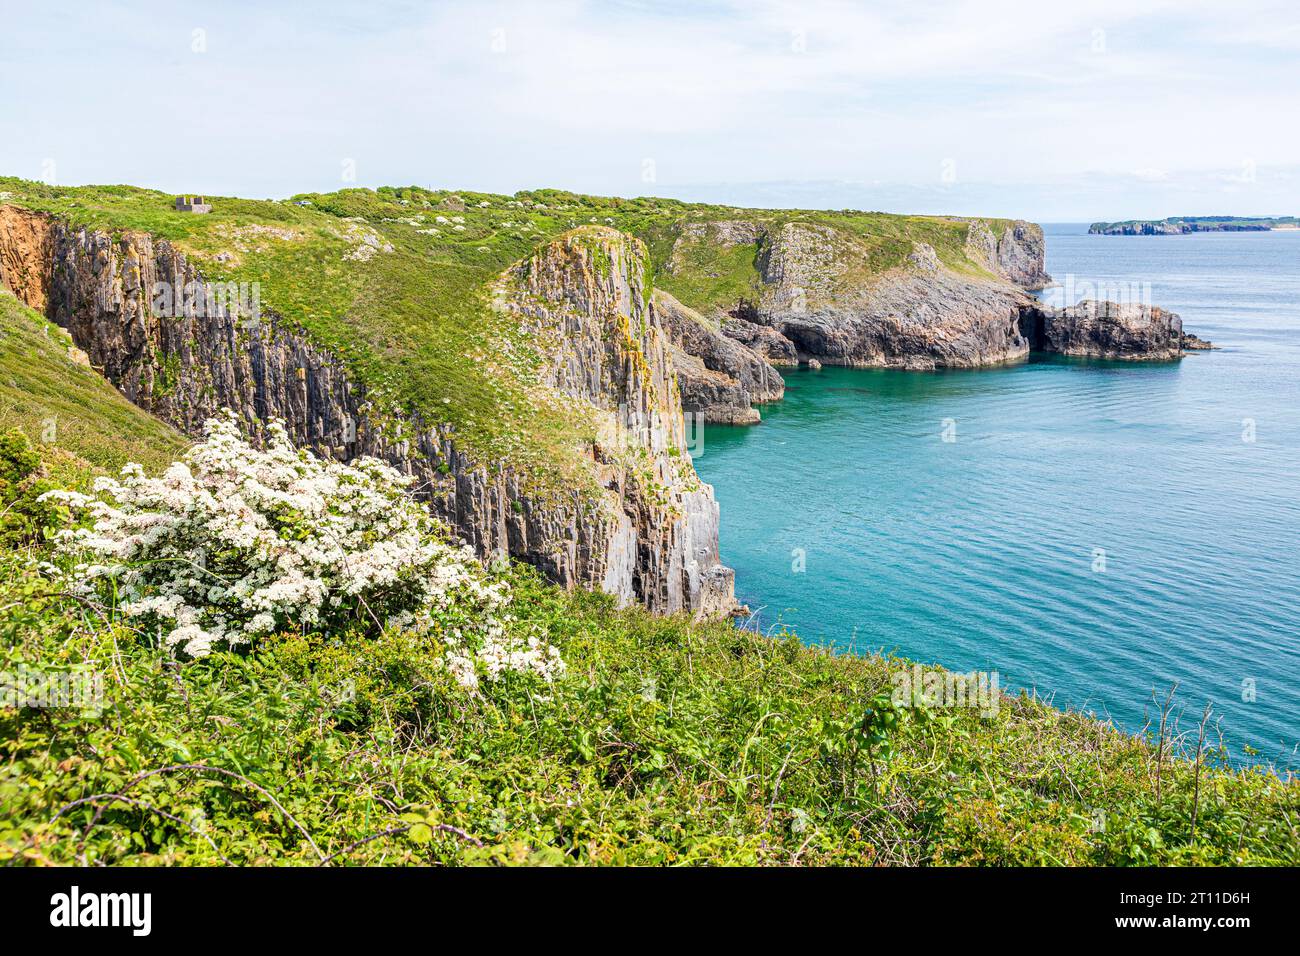 A view of the cliffs towards Lydstep Point from Skrinkle Haven, Lydstep in the Pembrokeshire Coast National Park, West Wales UK Stock Photo